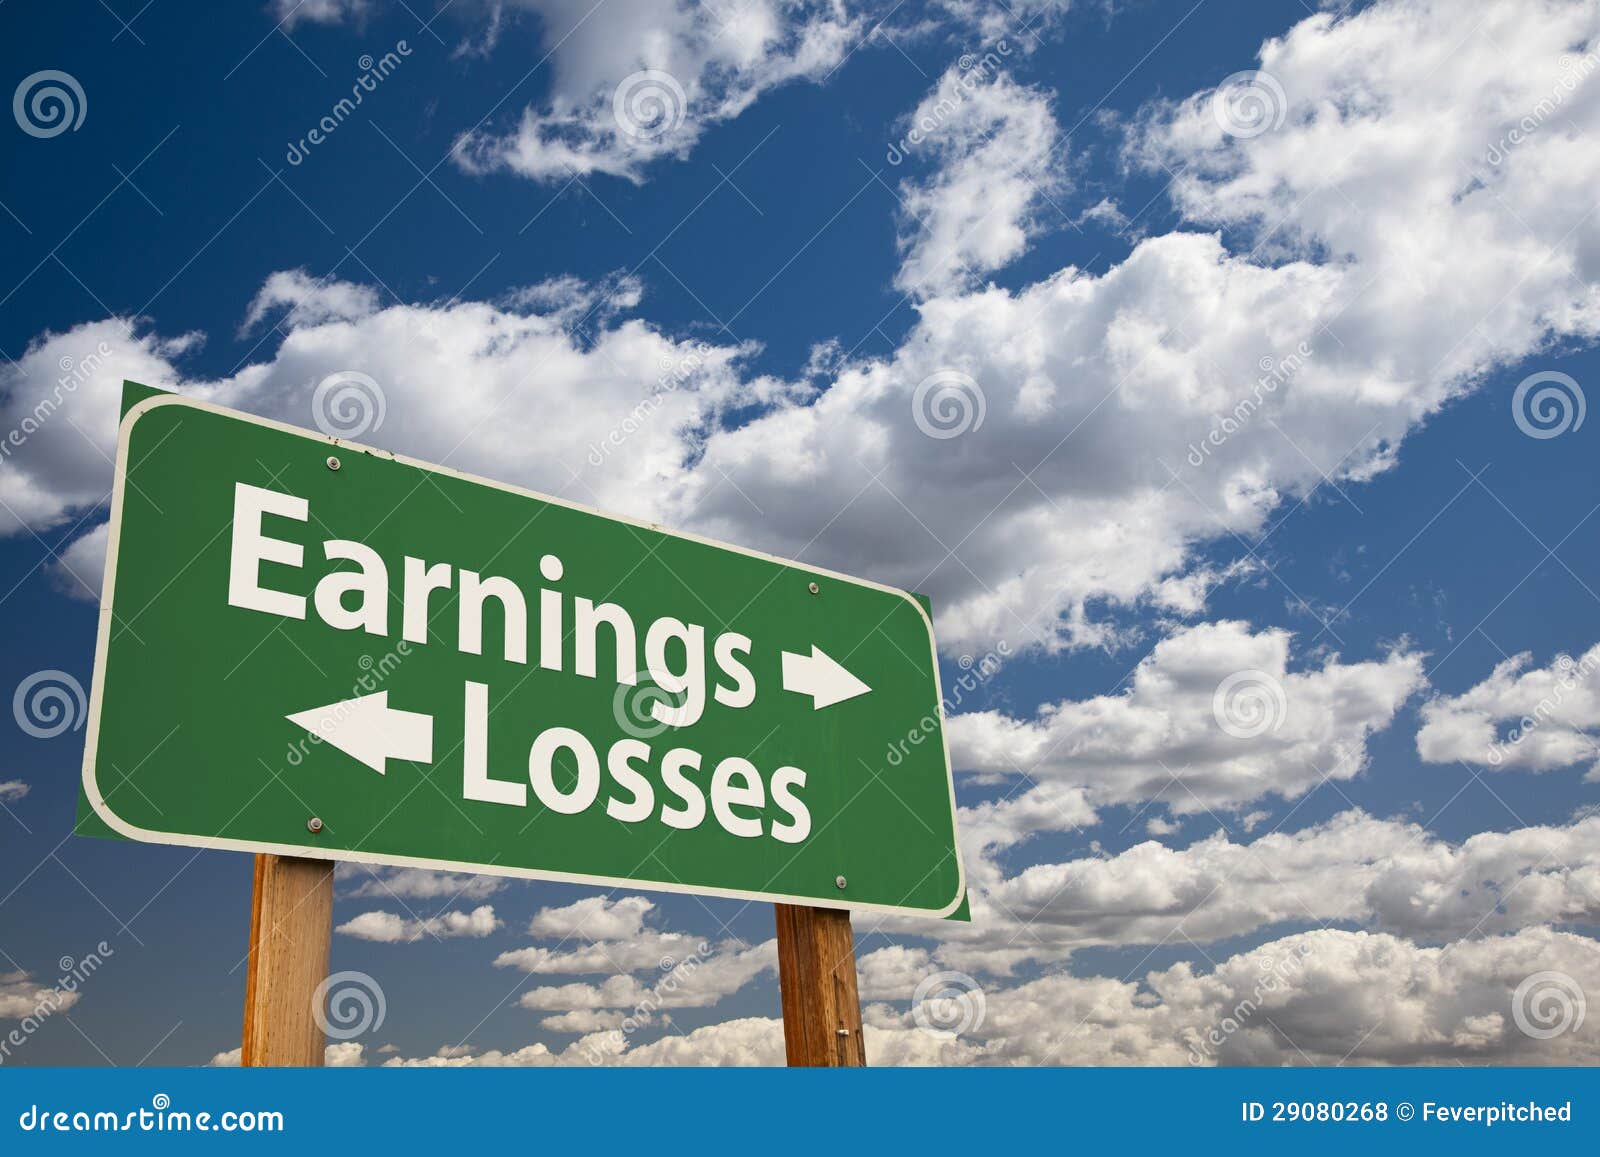 earnings, losses green road sign over clouds